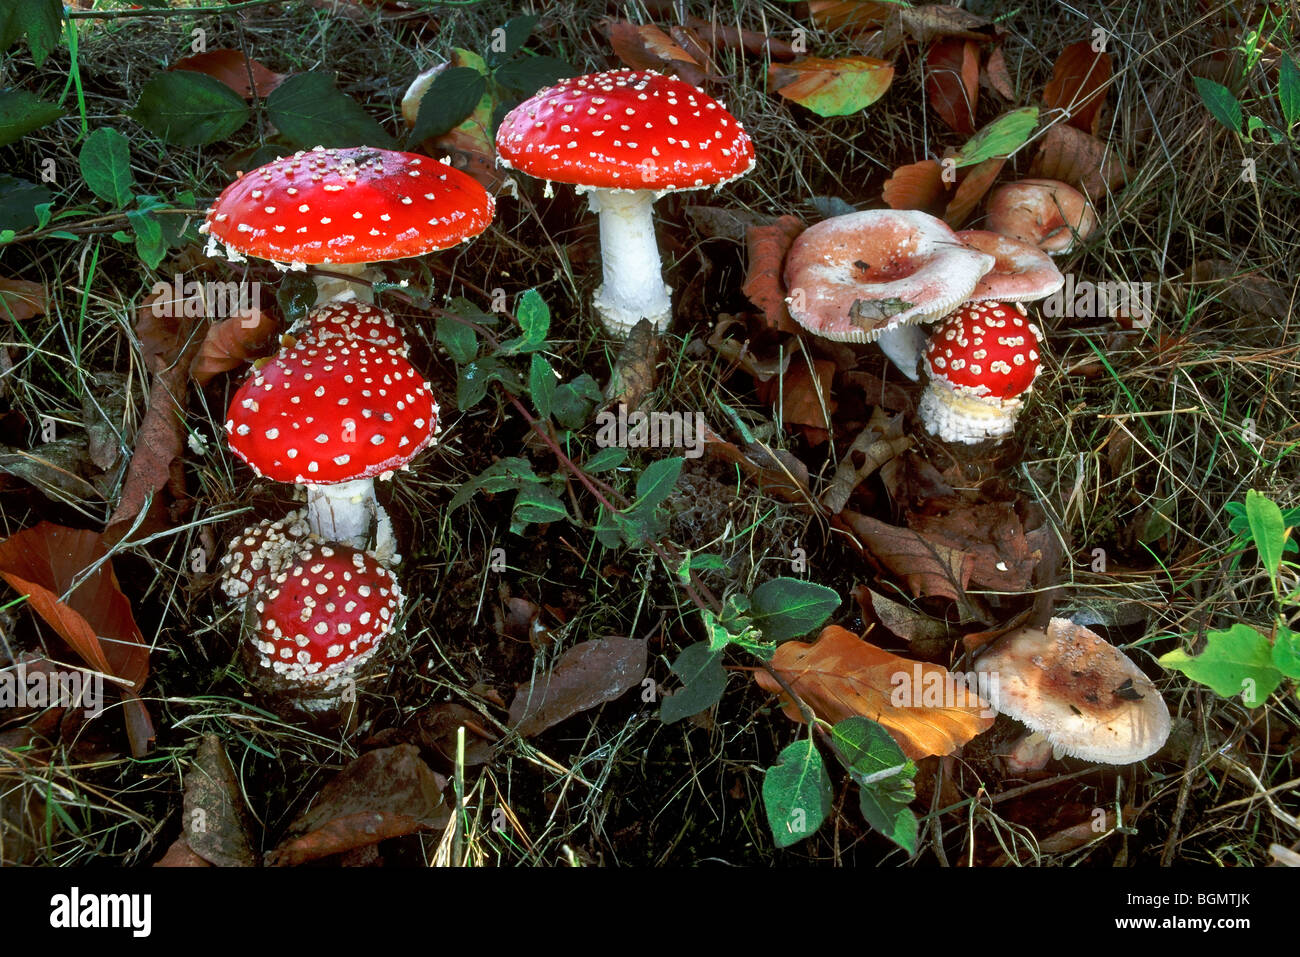 Fly agaric mushrooms (Amanita muscaria) in different growing stages Stock Photo